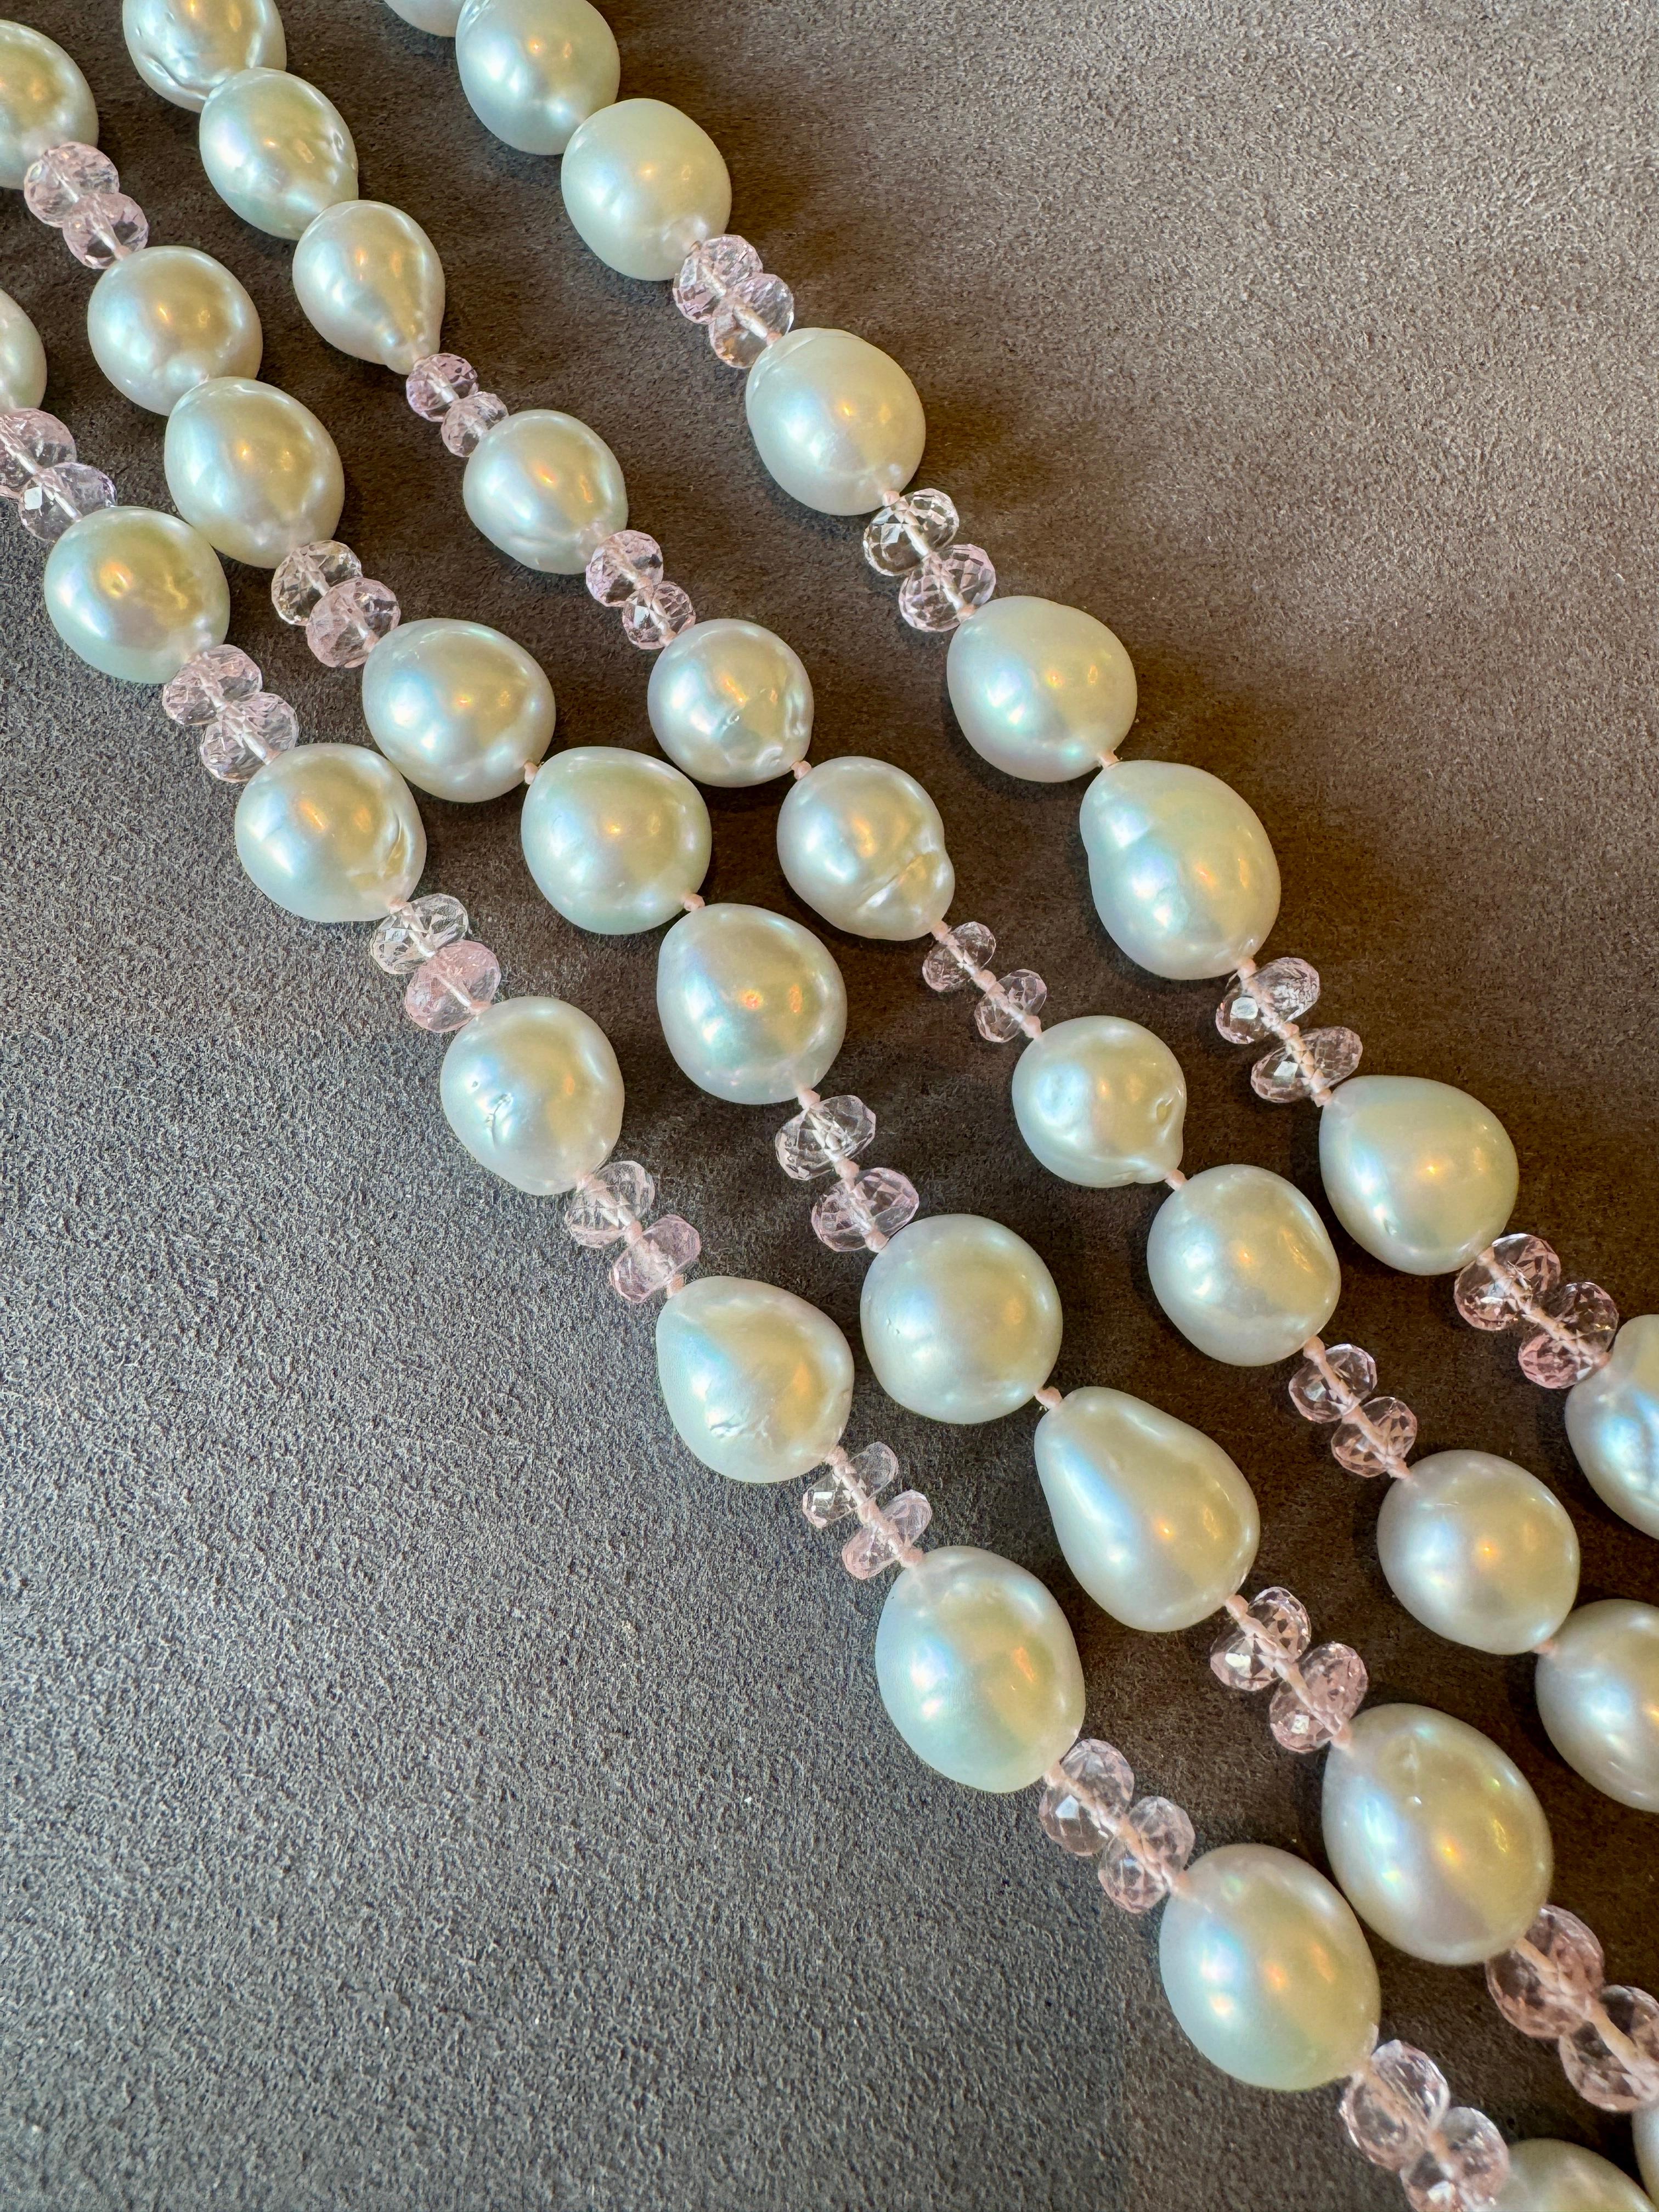 Briolette Cut South Seas Baroque Cultured Pearl and Morganite Necklace By Assael For Sale